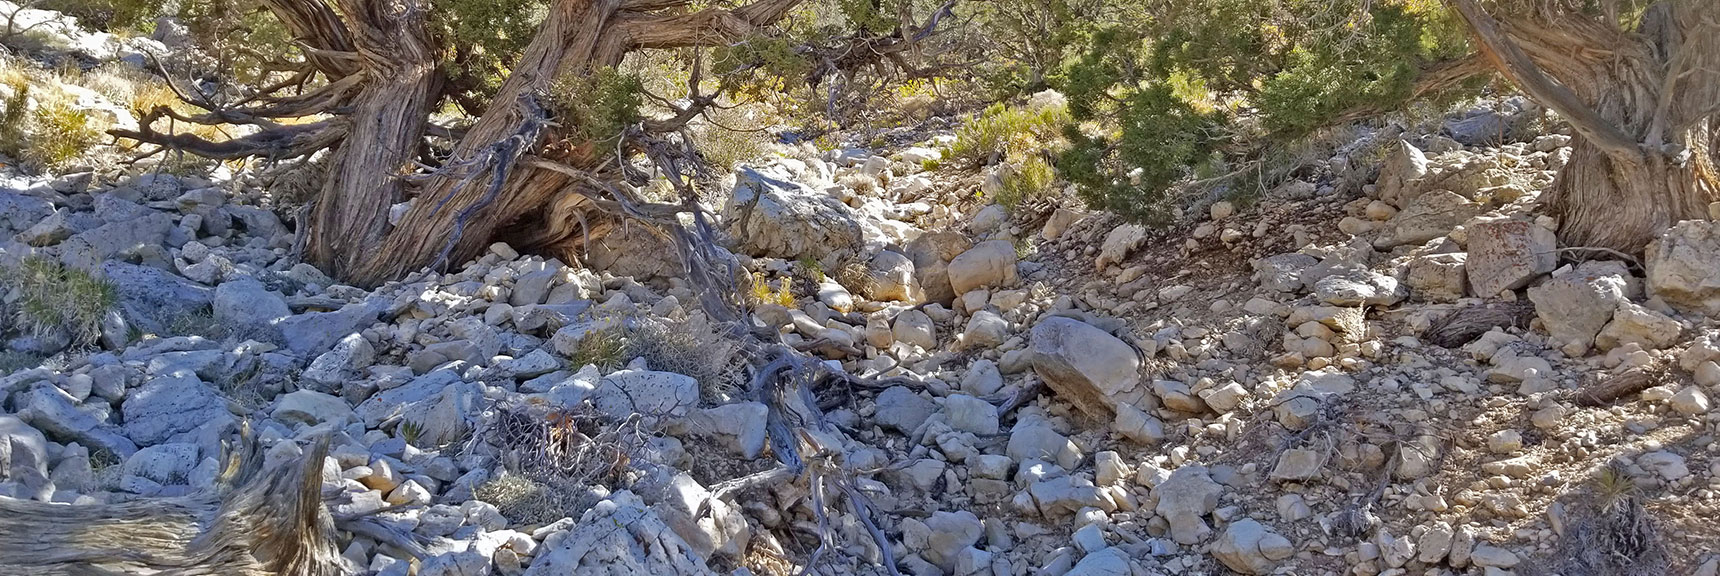 Continuing Up the Approach Wash. Is This Still the Mike Alcorn Trail? | La Madre Mountain,, El Padre Mountain, Burnt Peak | La Madre Mountains Wilderness, Nevada